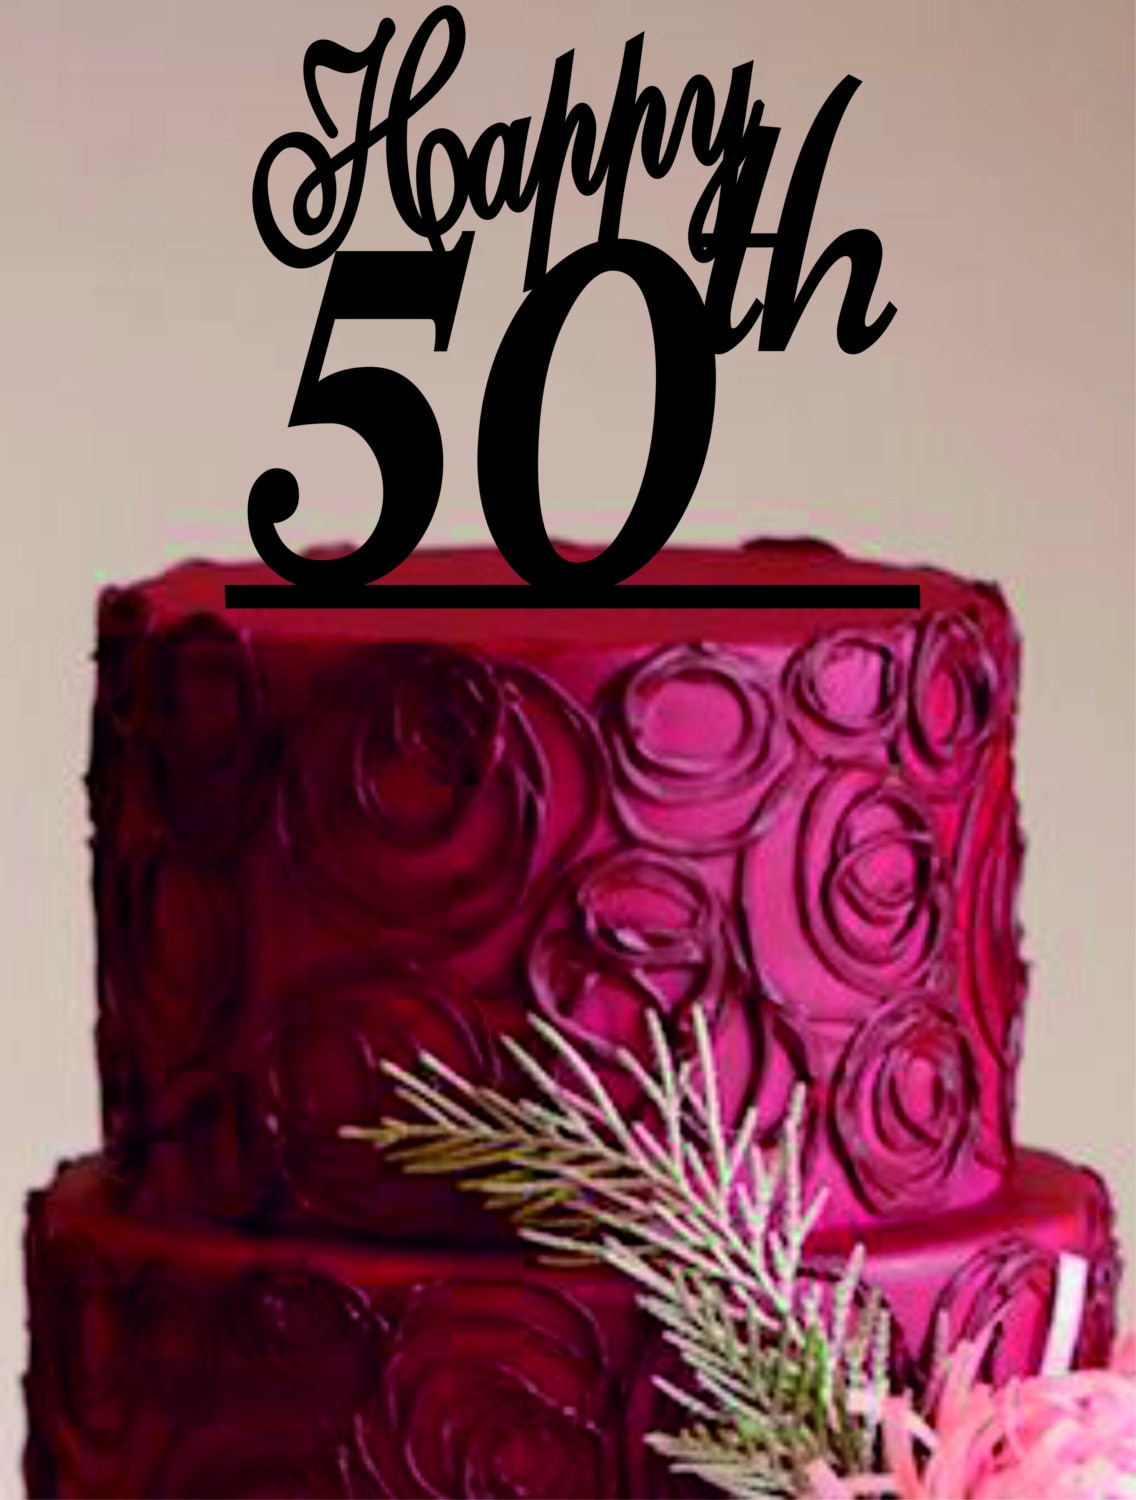  Happy  50 th  cake  topper 50th  birthday  cake  topper 50  years